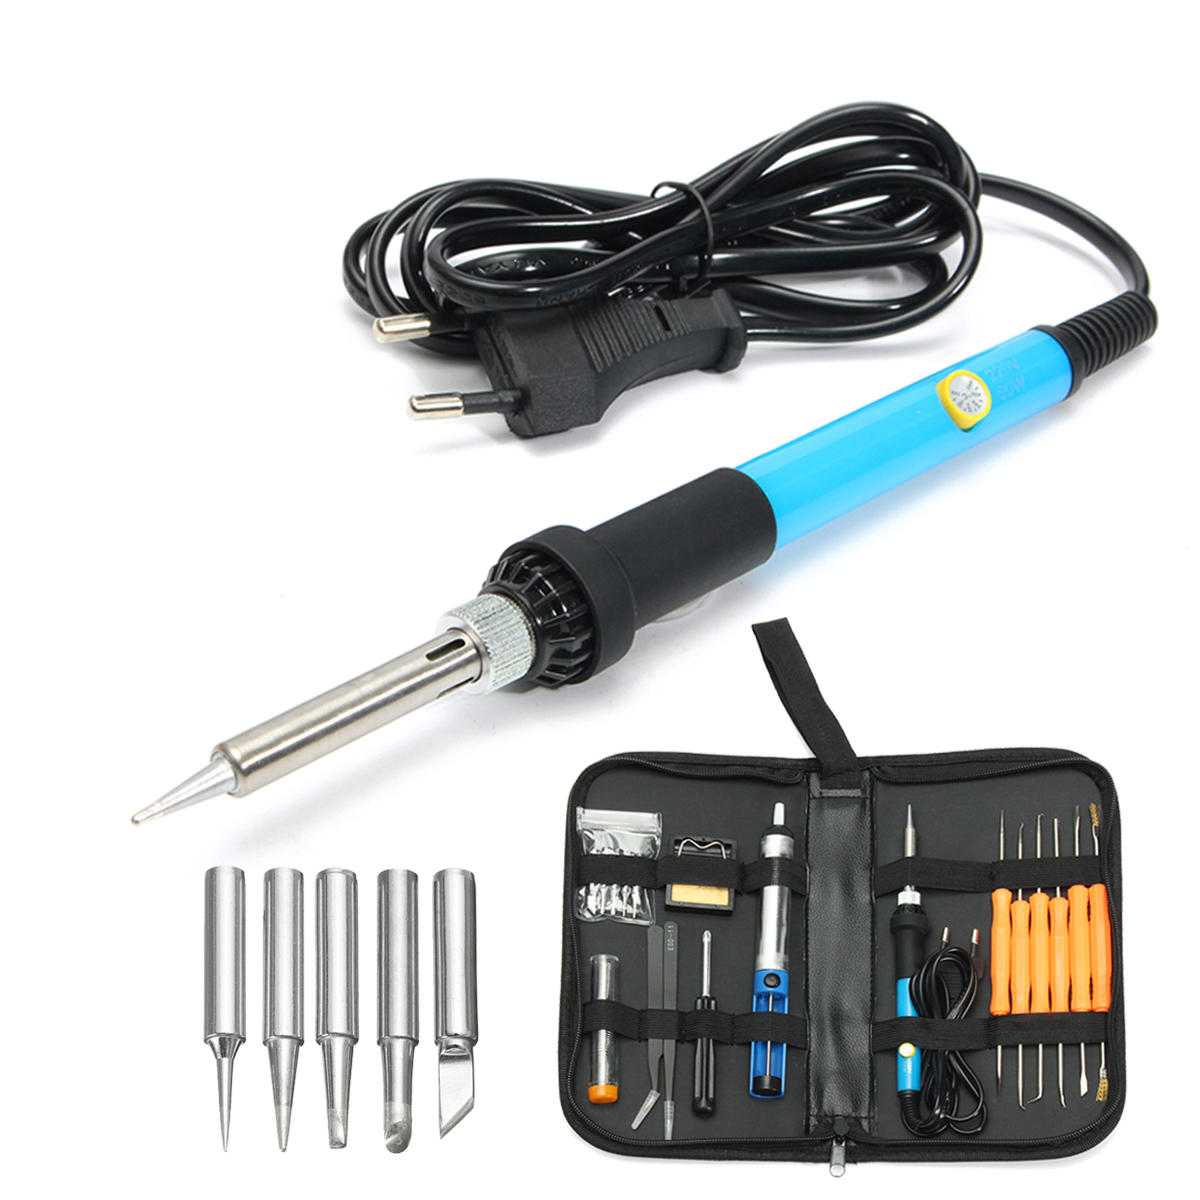 110V/220V 60W Adjustable Electric Temperature Welding Soldering Iron Tool